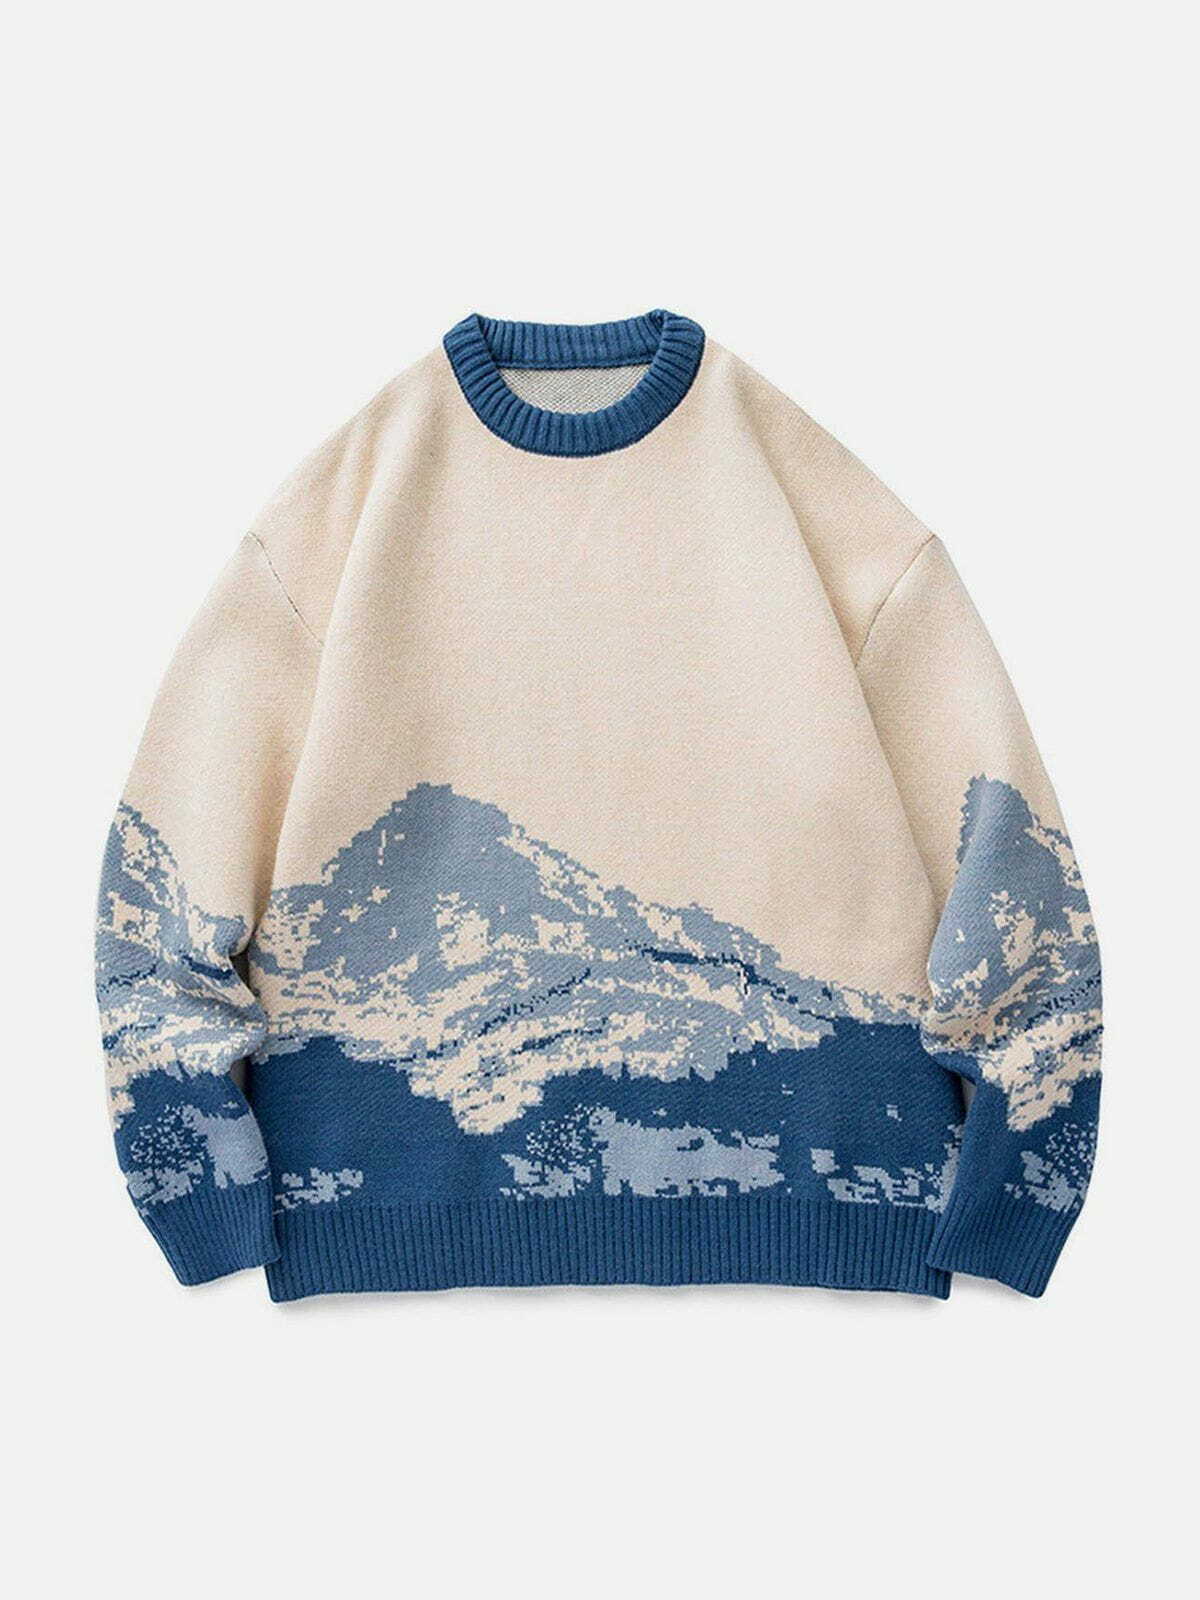 snow mountain gradient knit sweater edgy mountain fade style 7572